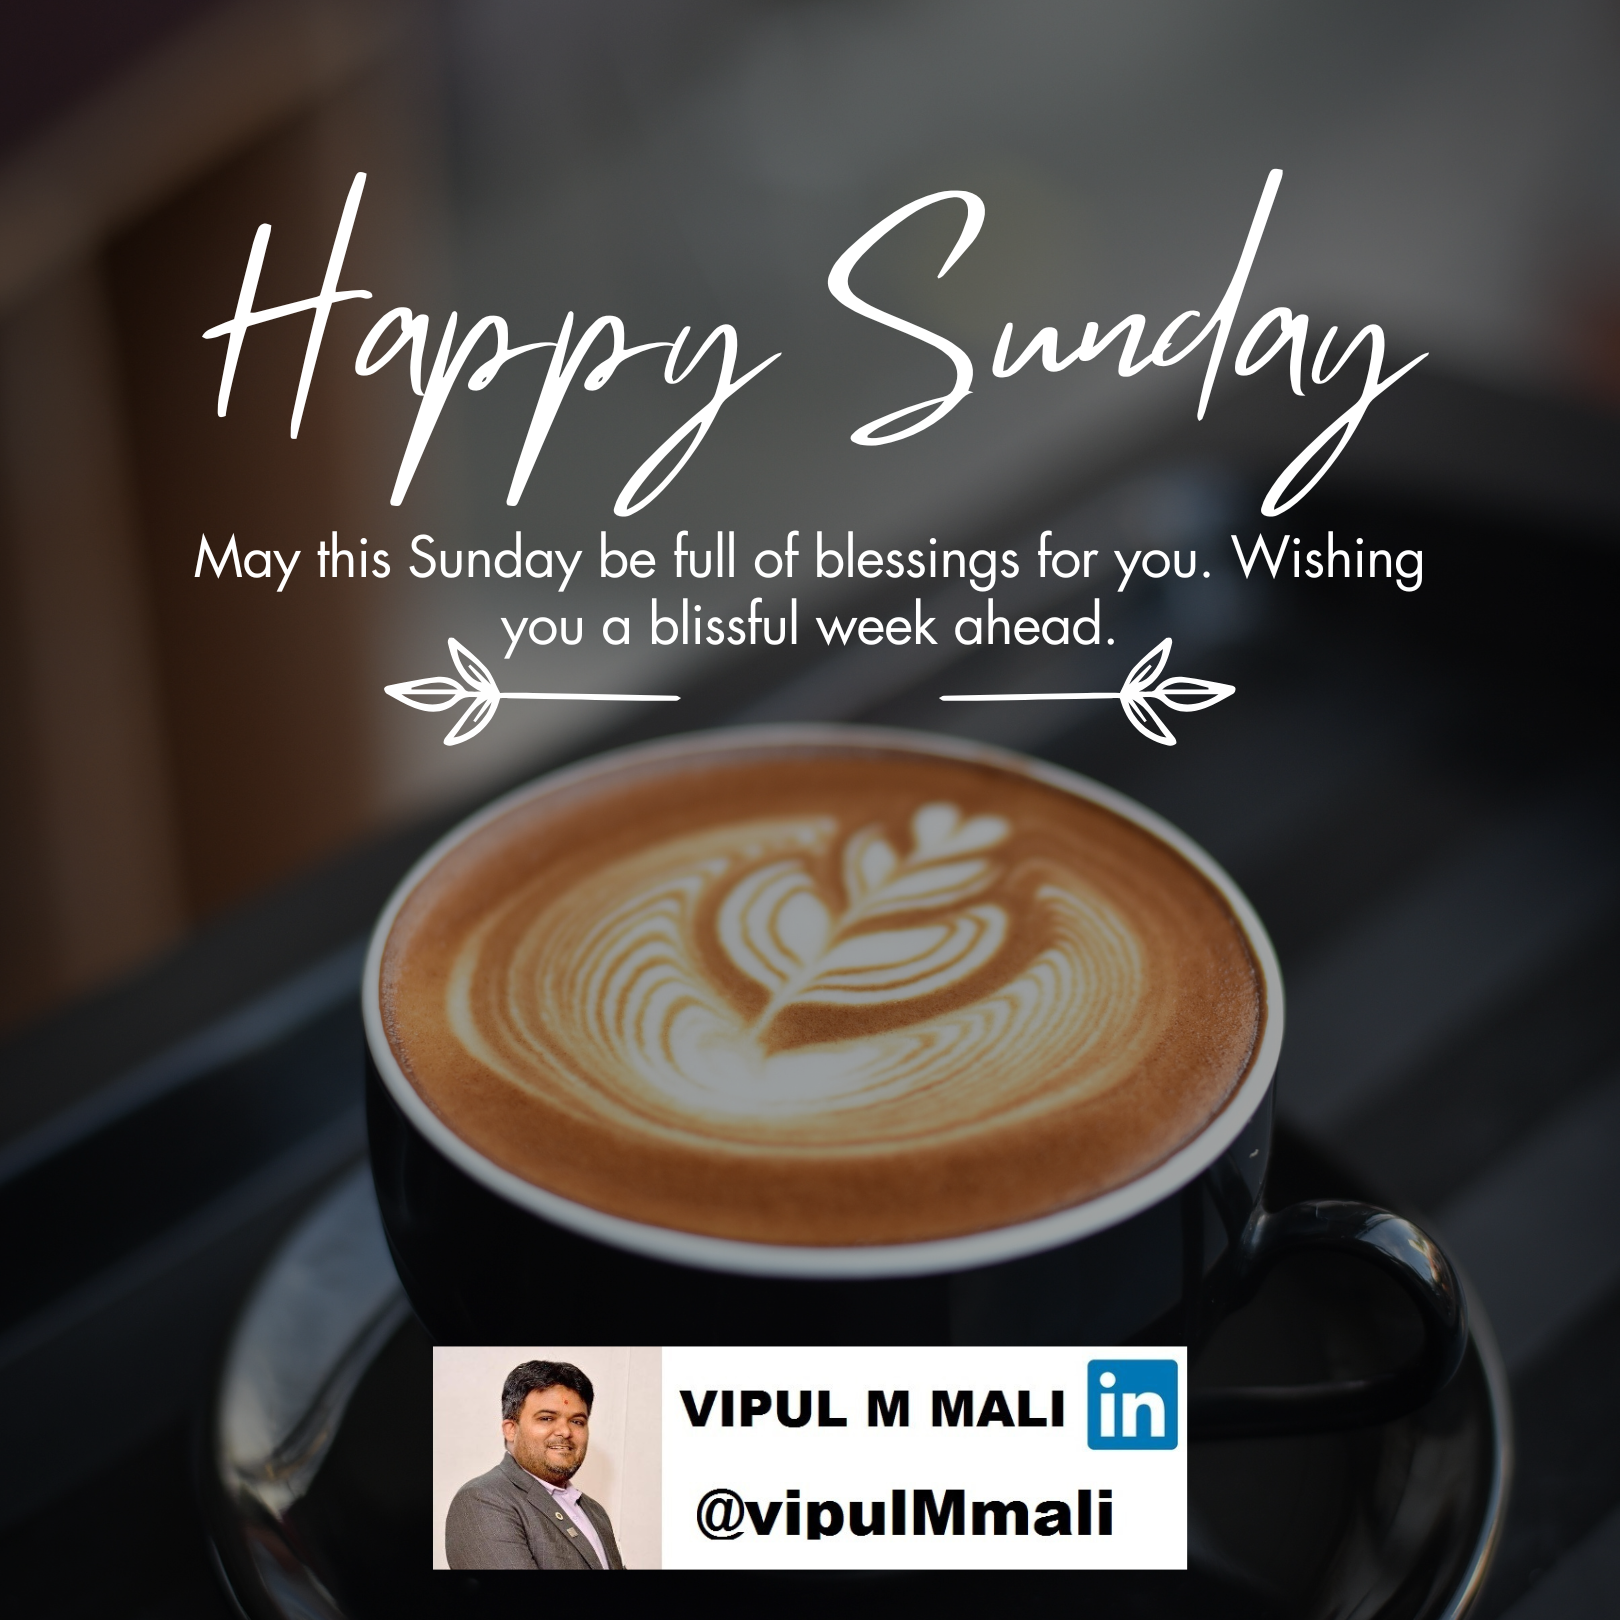 Wish you a Happy Sunday. So what are you doing today? Let's see what we can do to make this day and entire week more productive